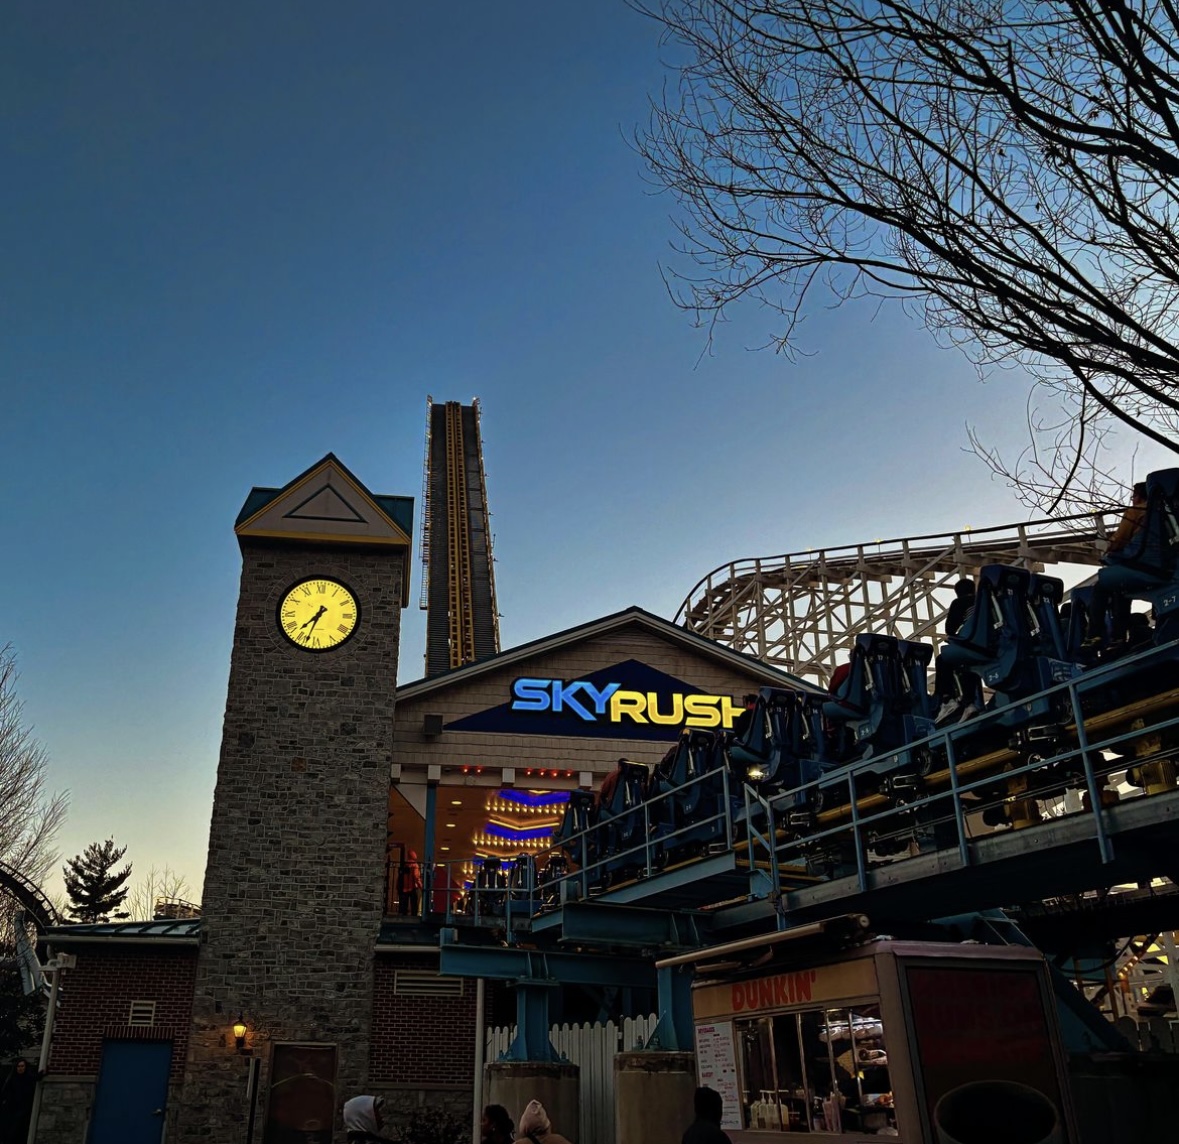 Have you experienced a first-class ride on Skyrush? Join us Saturday and Sunday for rides, food, Hershey Character selfies and sun! Hours: Saturday from 11 AM-8 PM, Sunday from 11 AM-7 PM Tickets: bit.ly/2WWppMo (CoasterTherapy, Zenride.brooks, Waldameer_Enthusiast)